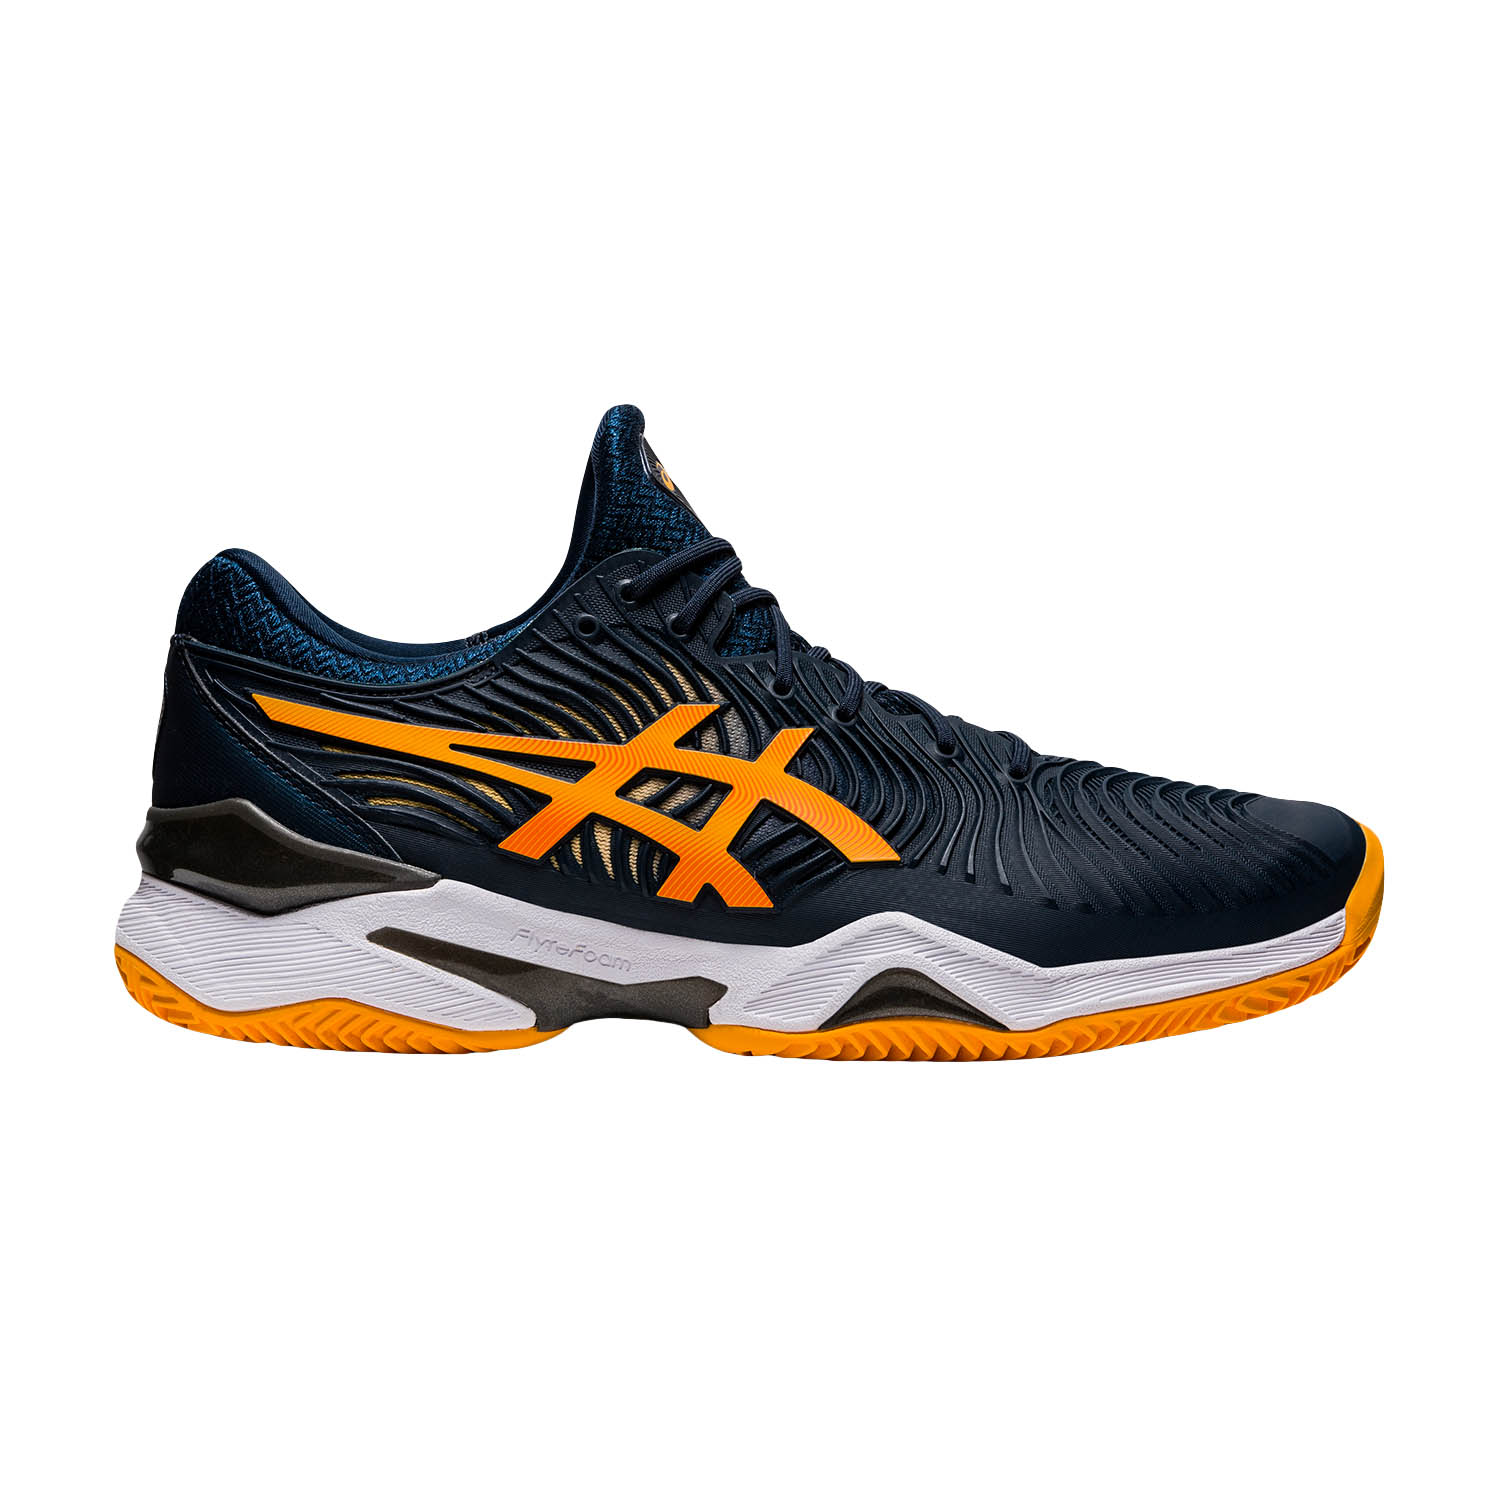 asics clay court tennis shoes